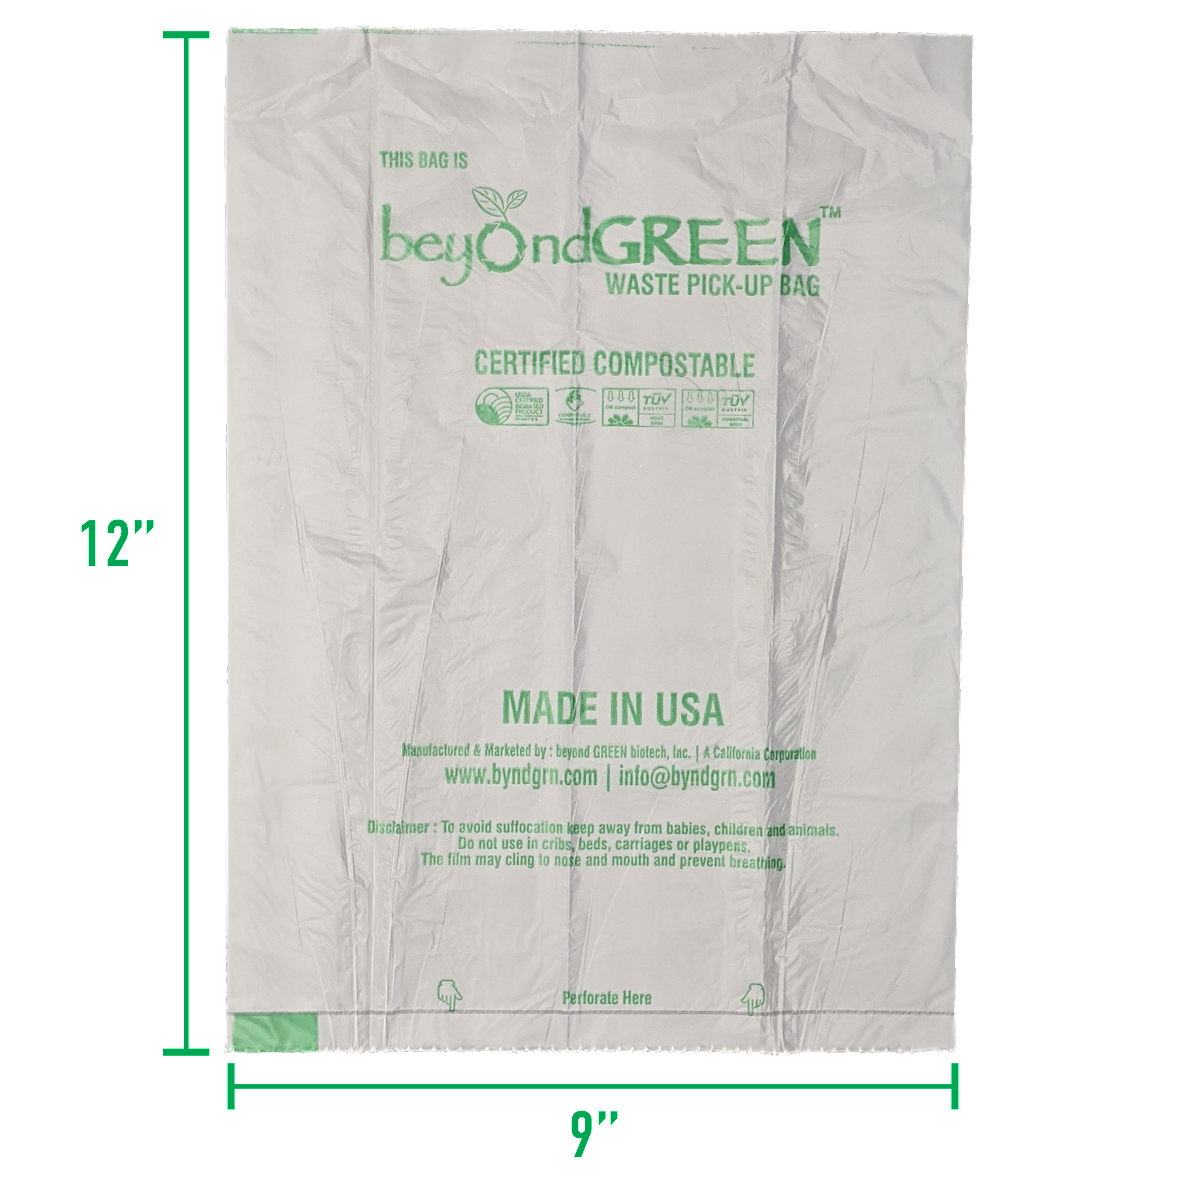 Beyond Green 100% Compostable Dog Poop Bags-Box of 90 Bags-6 rolls of 15 bags Made in USA. TUV OK Home & TUV OK Industrial Compost